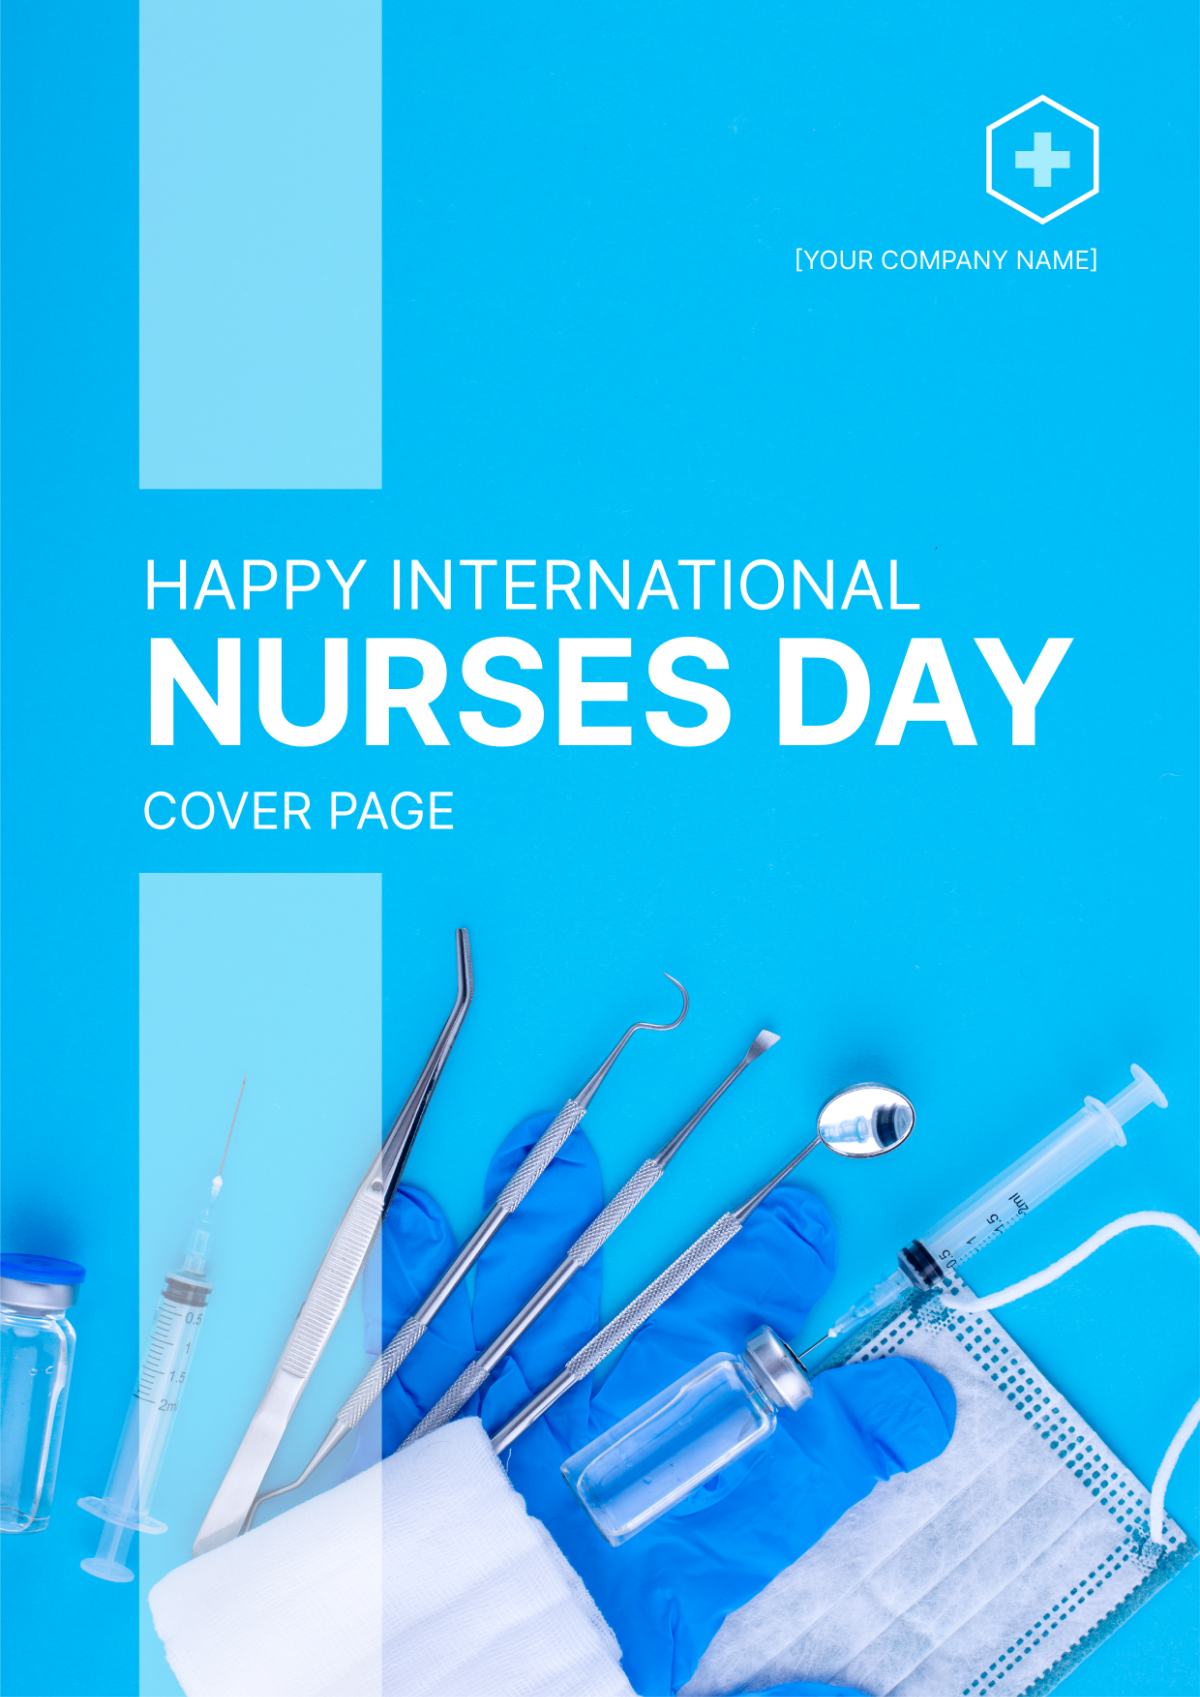 Happy International Nurses Day Cover Page Template